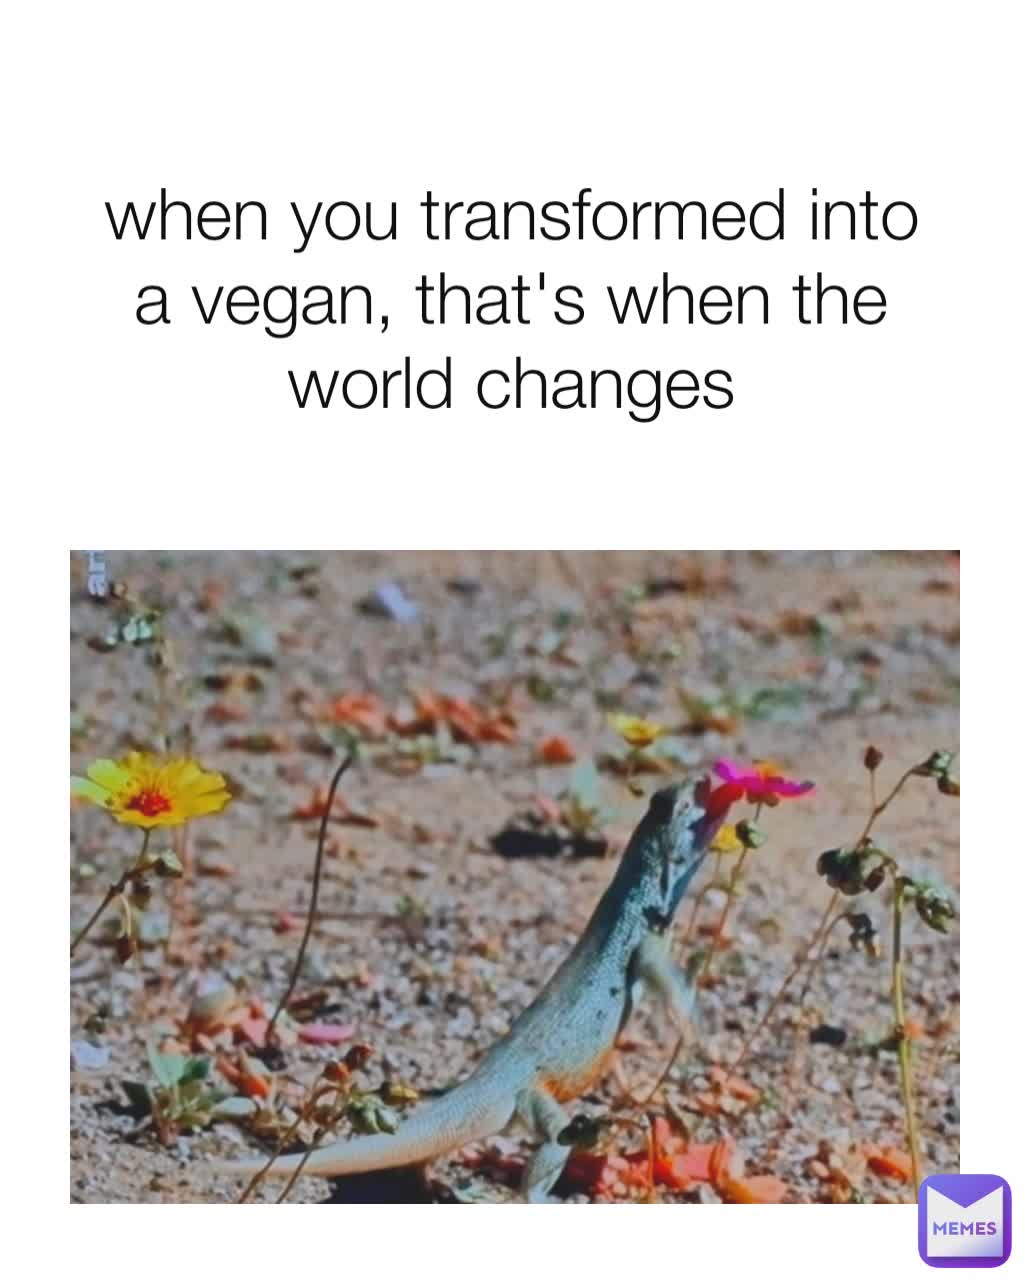 when you transformed into a vegan, that's when the world changes